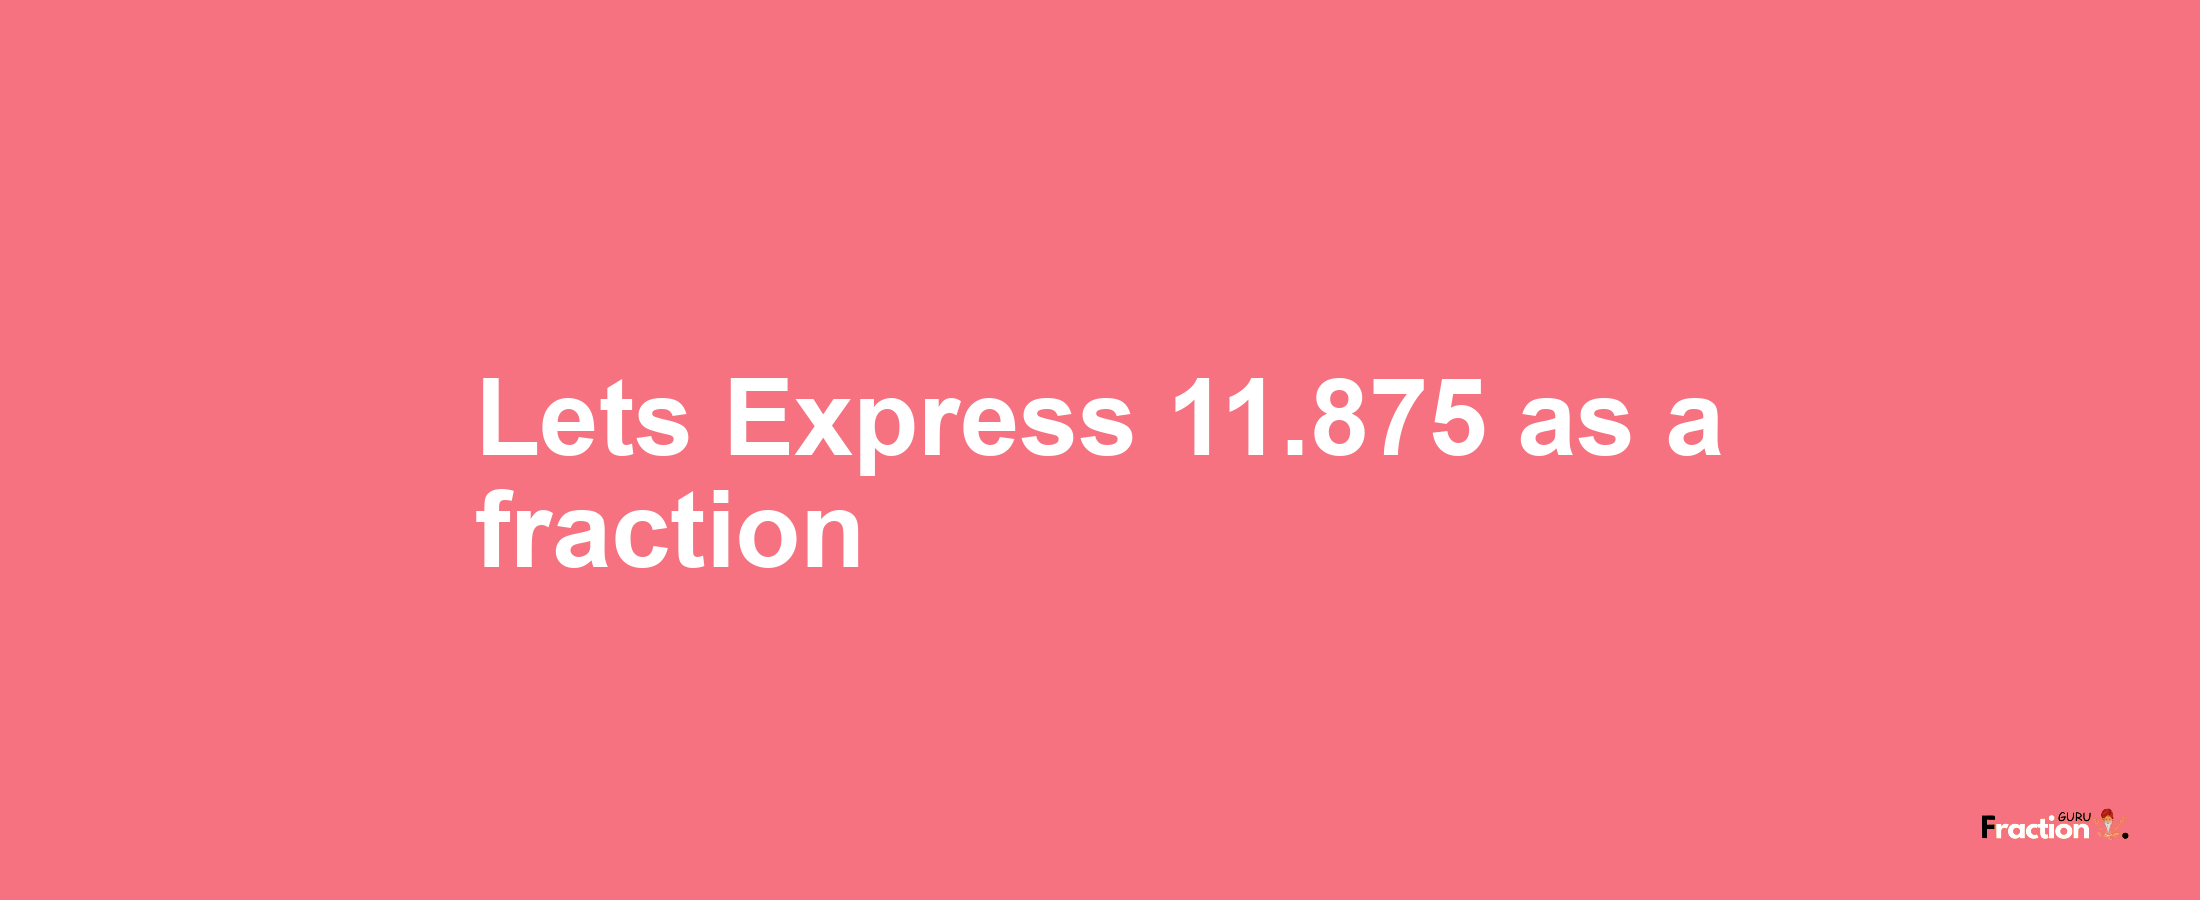 Lets Express 11.875 as afraction